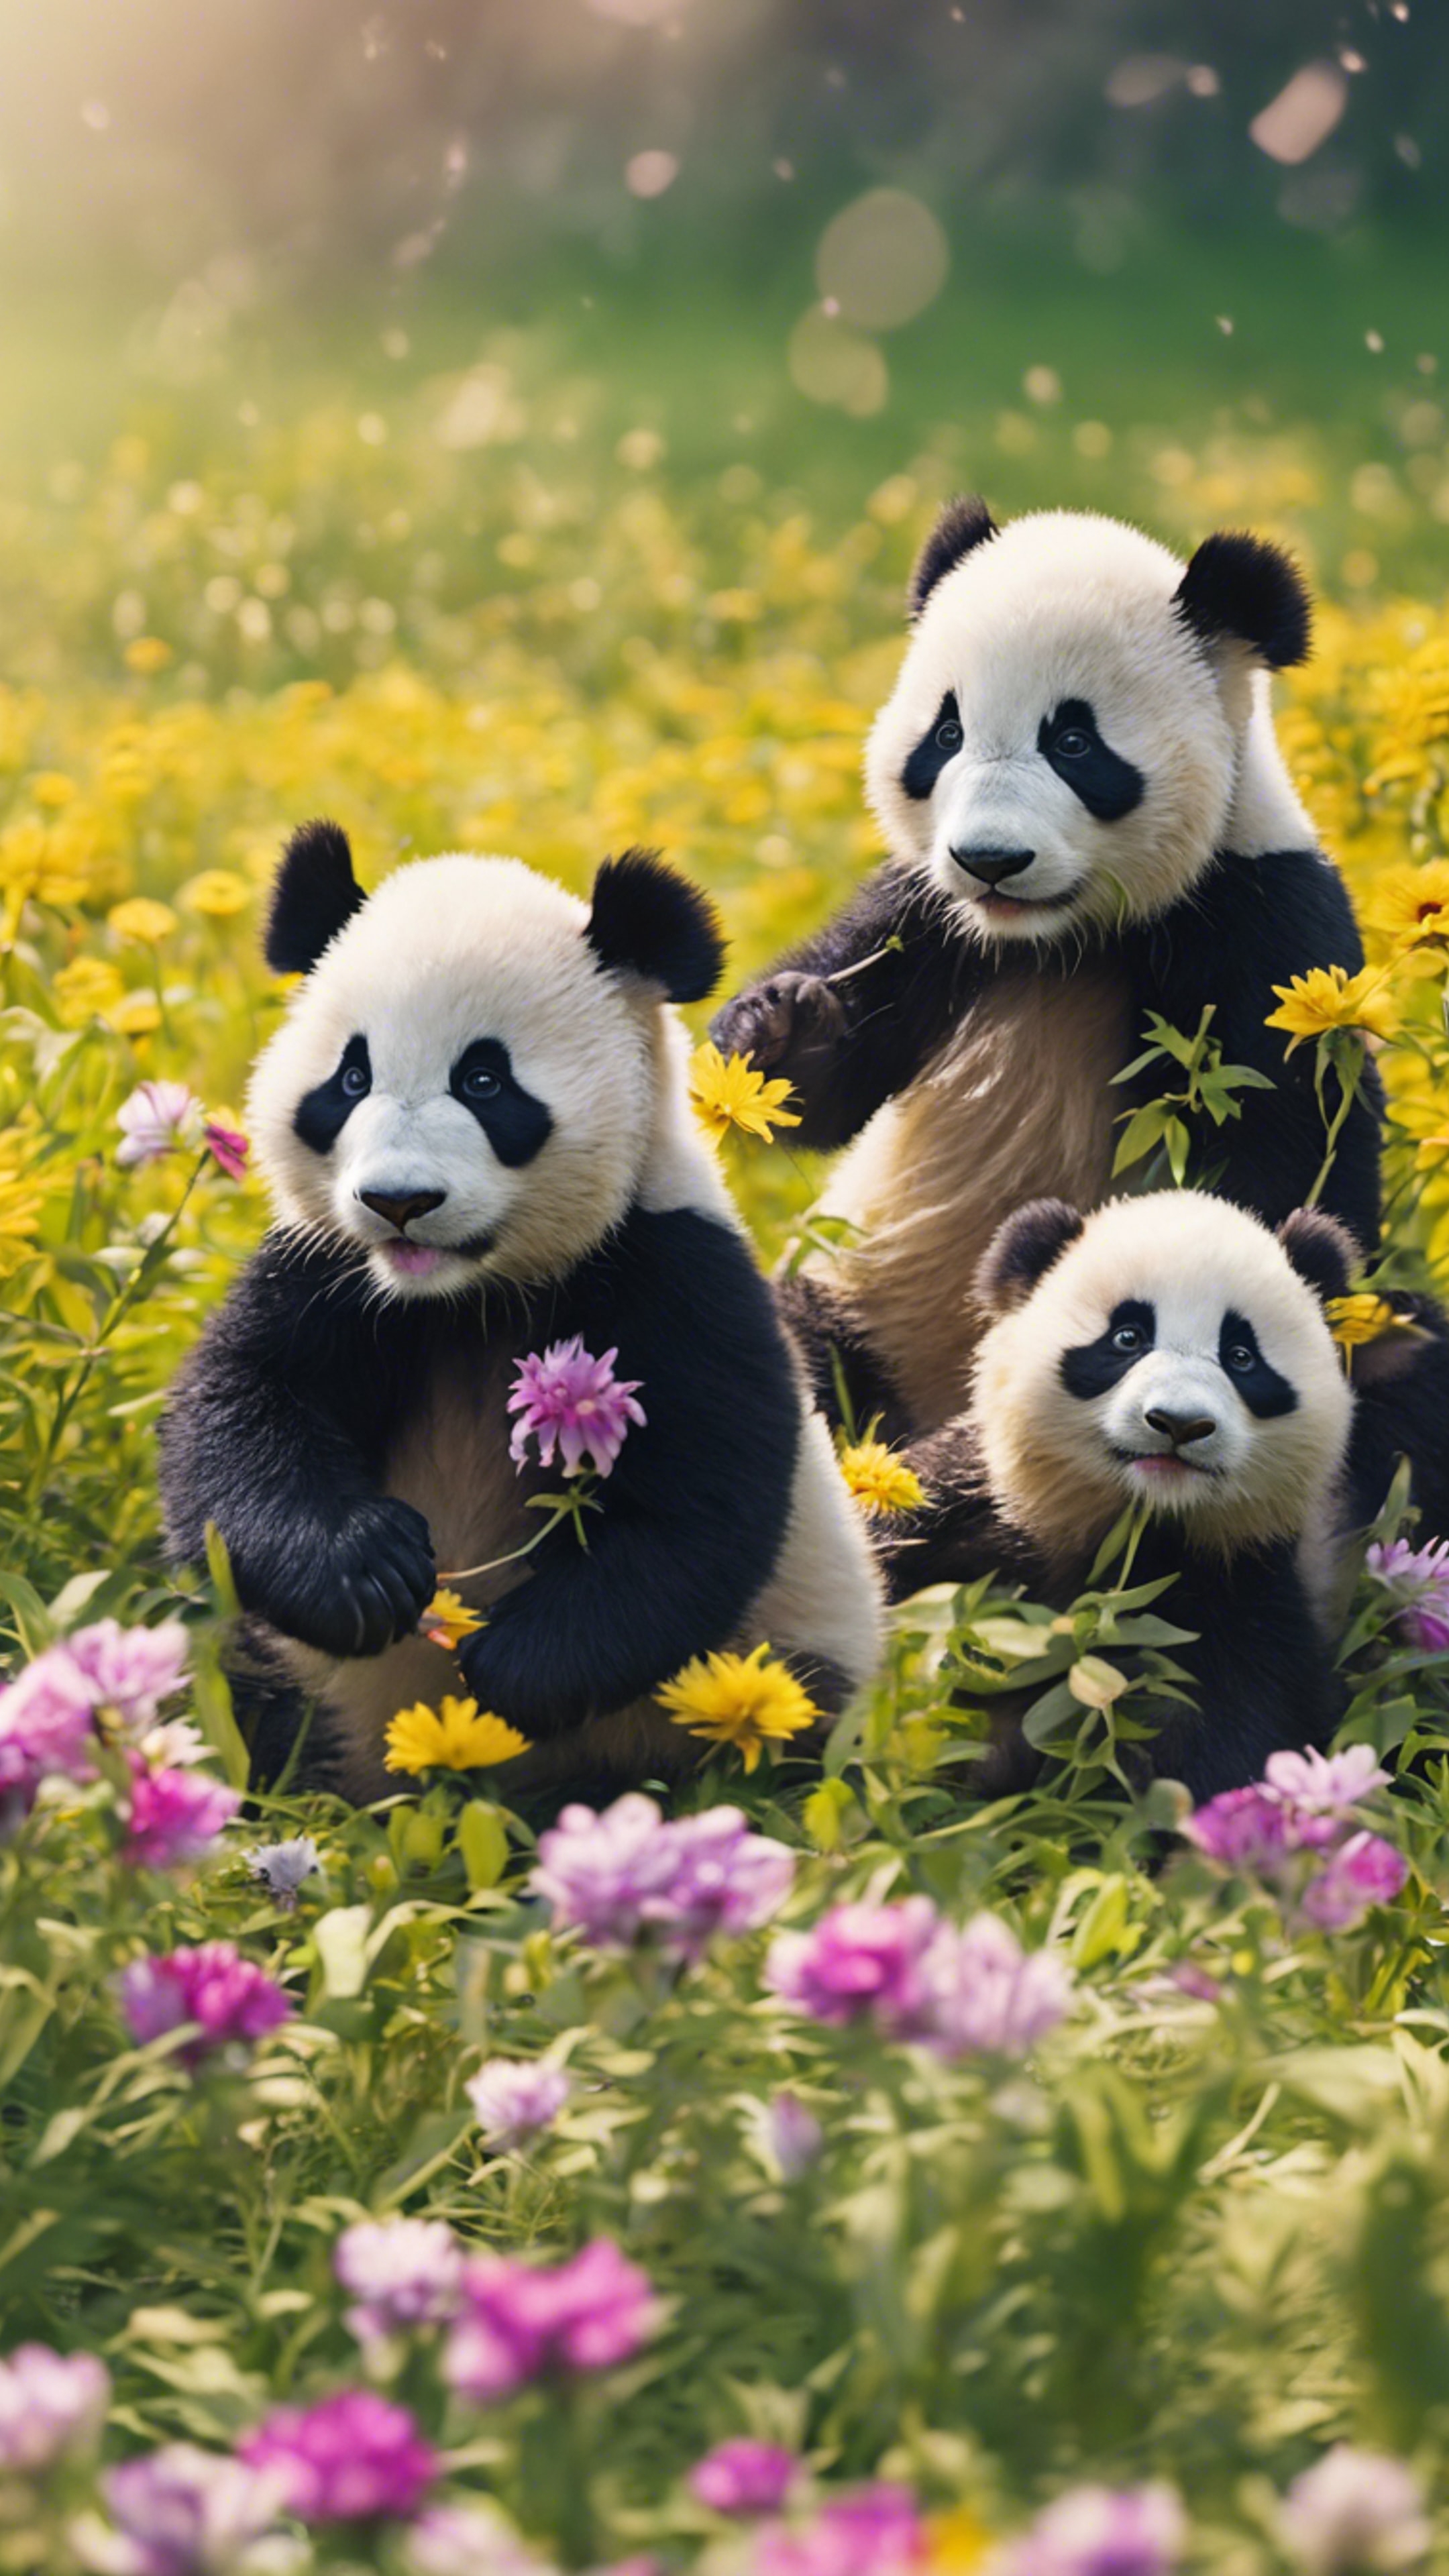 A group of lively panda cubs merrily playing tag in a field full of bright spring flowers. Tapet[9de4fa100eef4aefa43d]